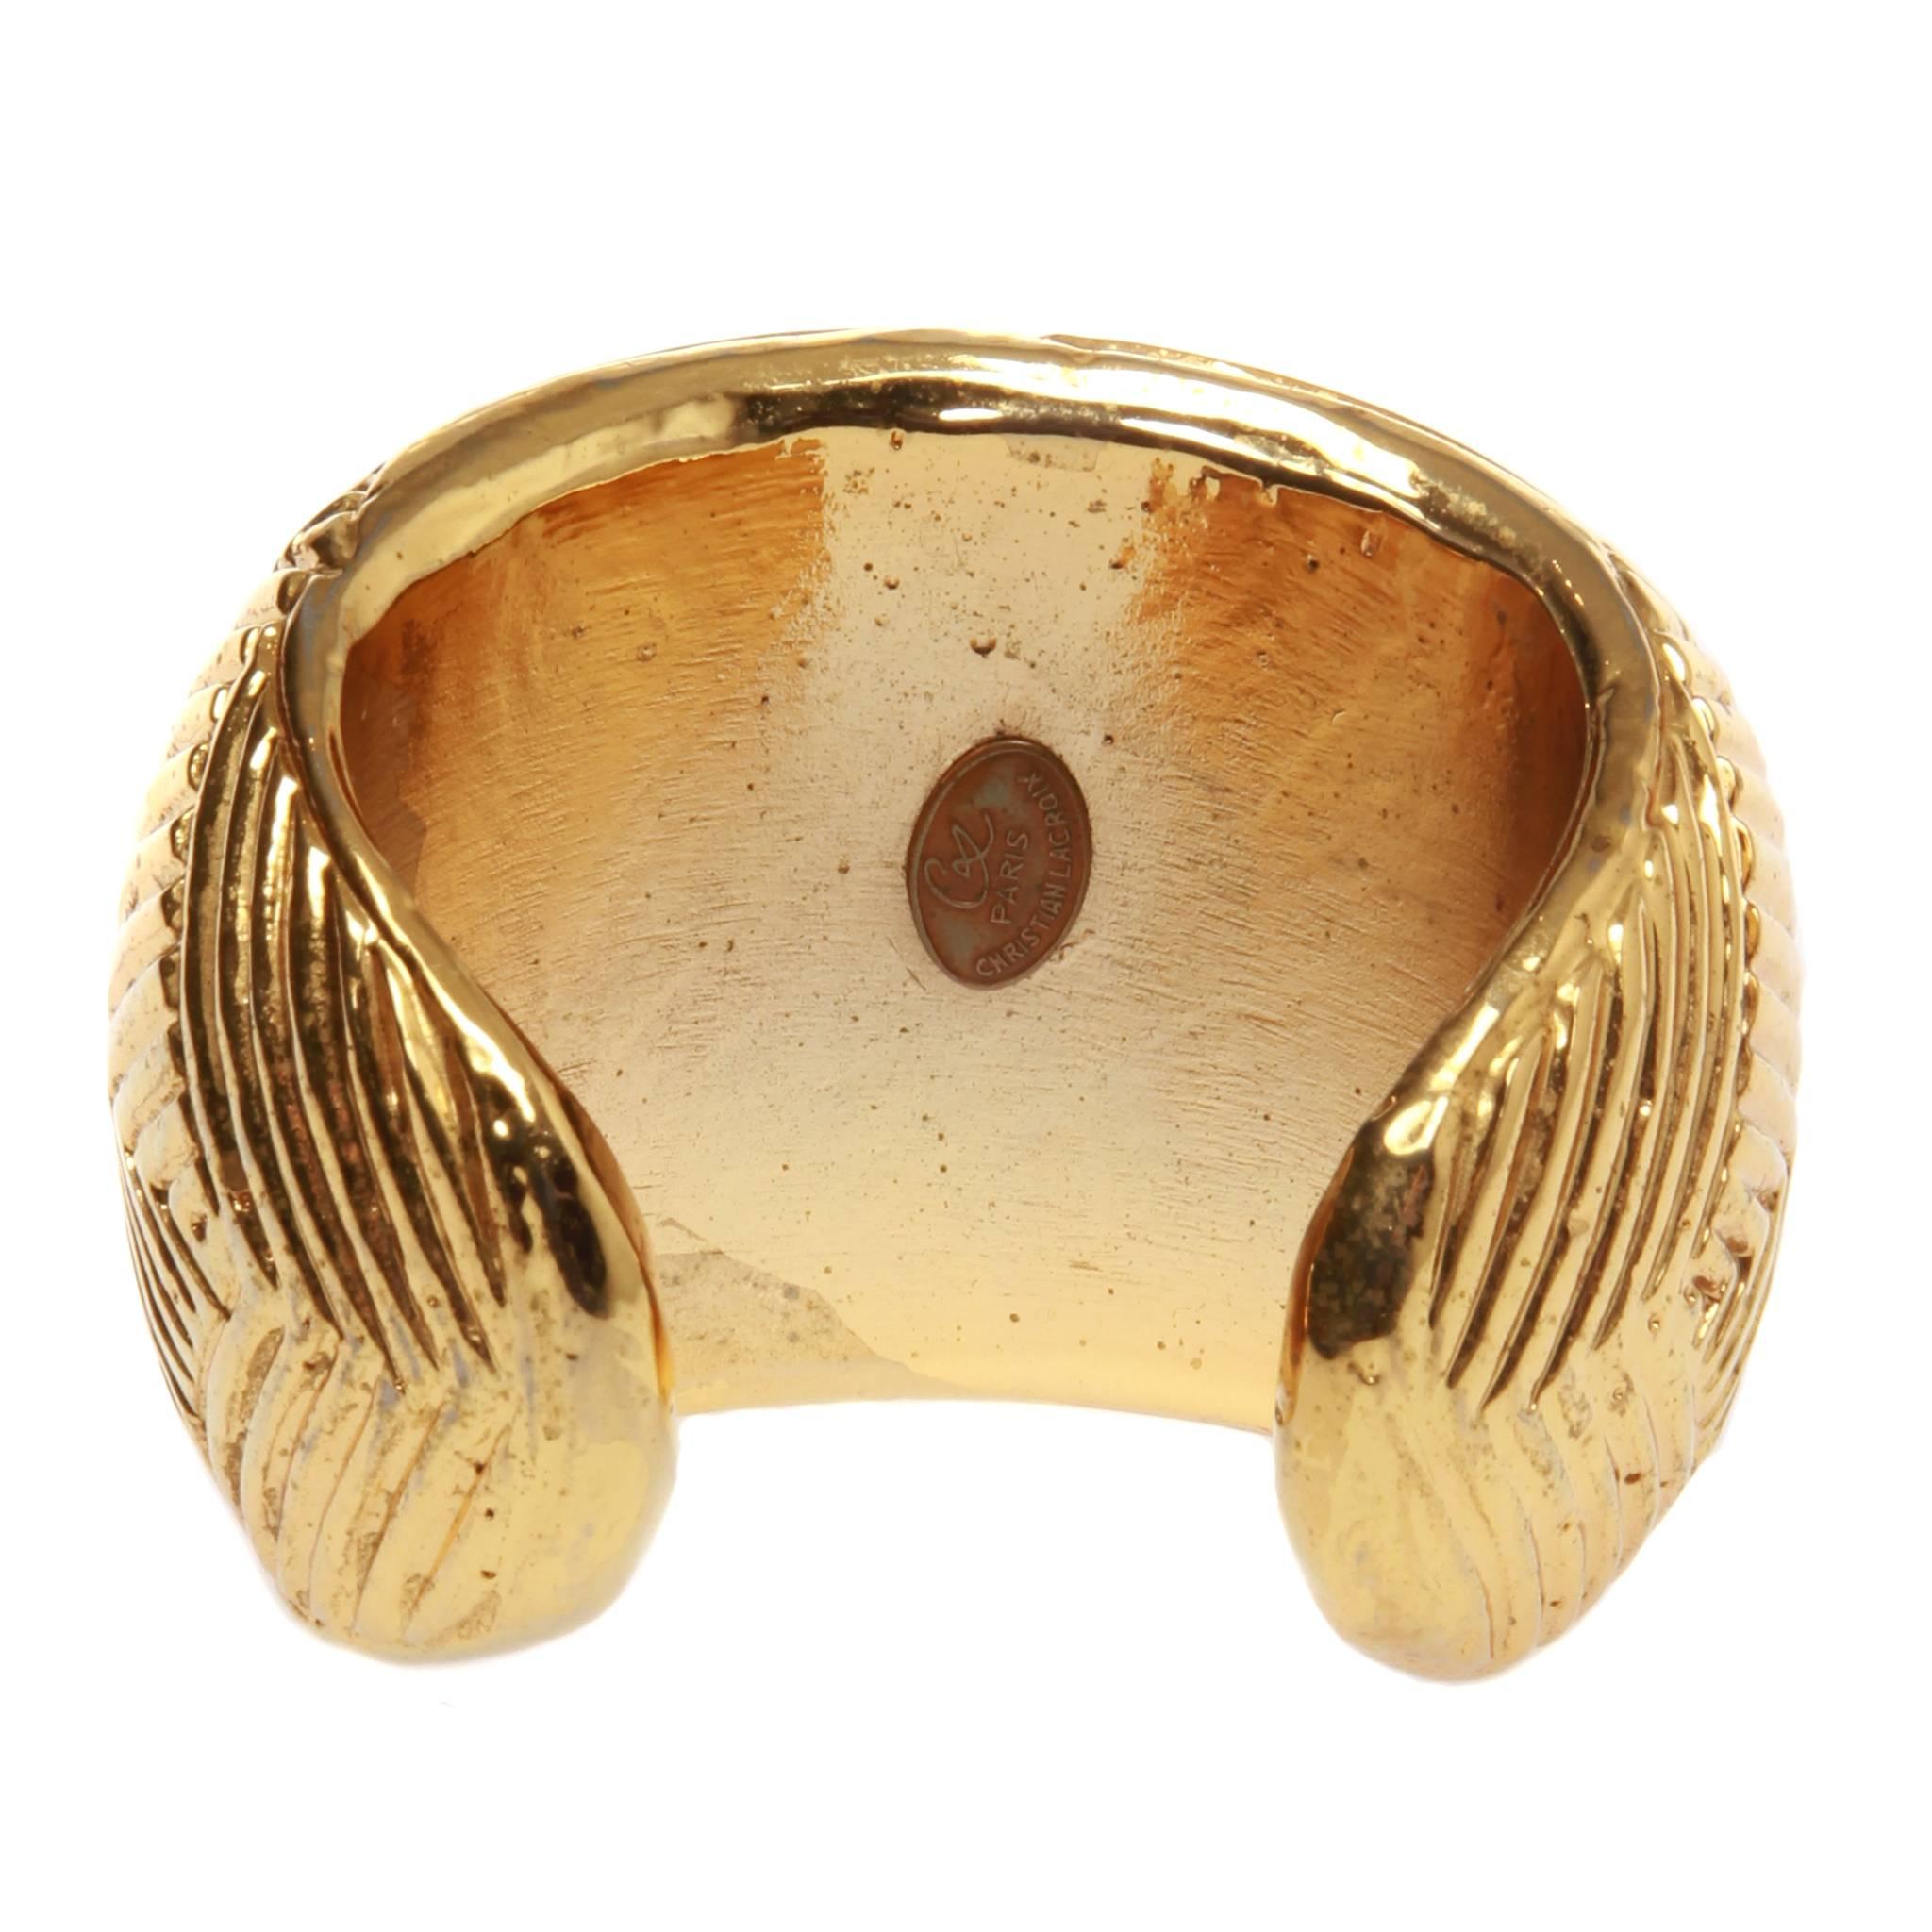 Vintage Christian Lacroix open cuff featuring a gold-tone herringbone textured surface. 